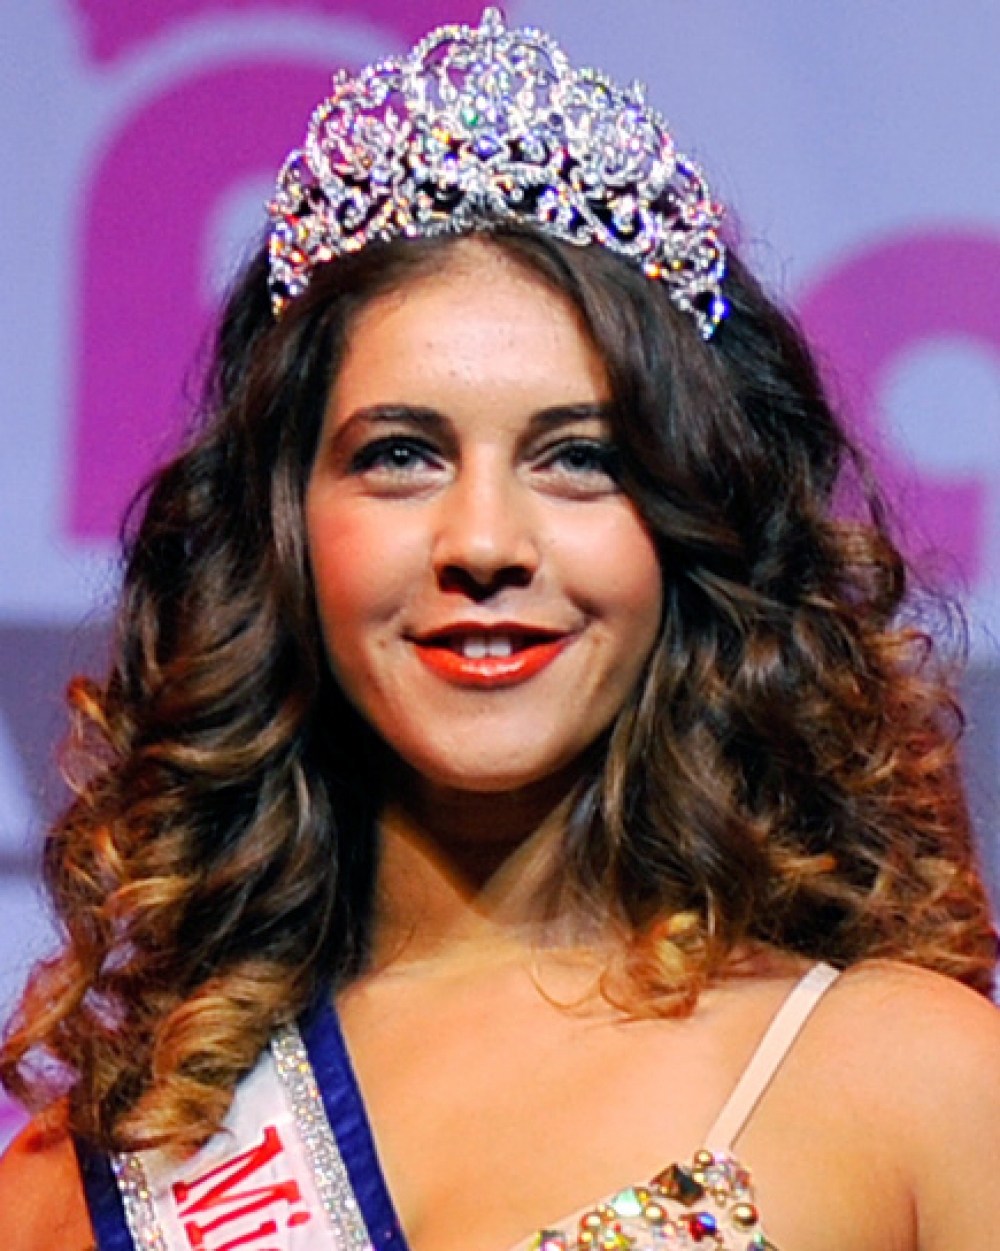 Miss Arab USA WikiPageant